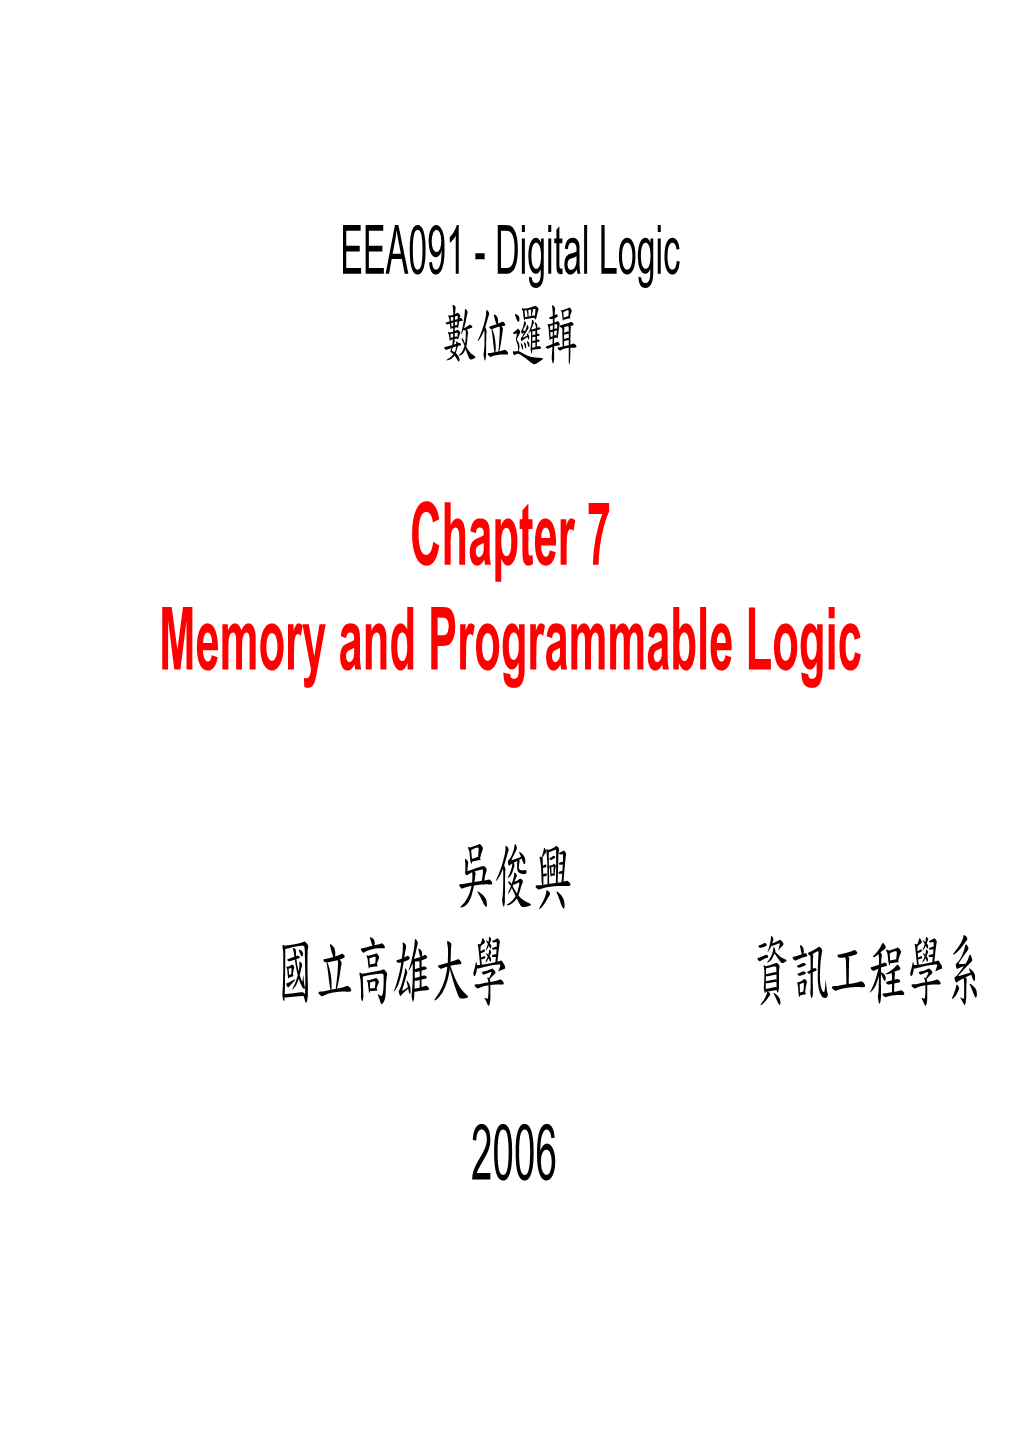 Ch7. Memory and Programmable Logic